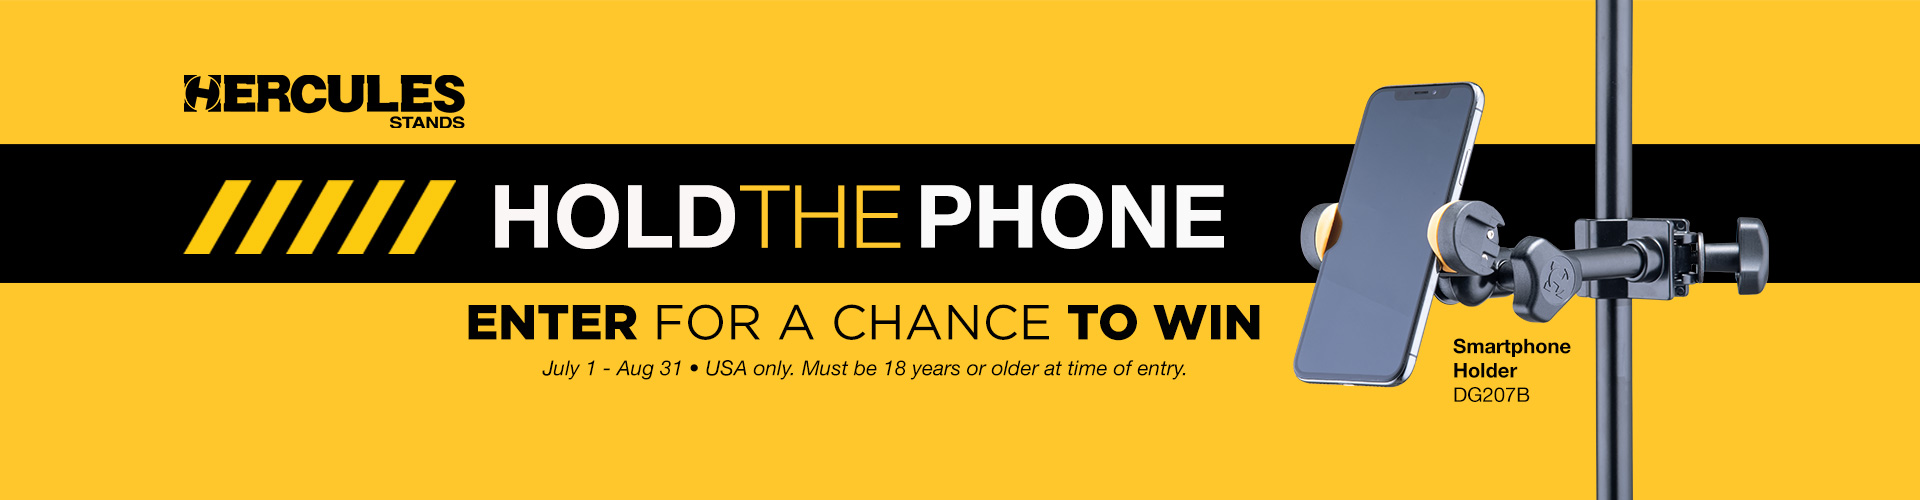 Hold the Phone Sweepstakes